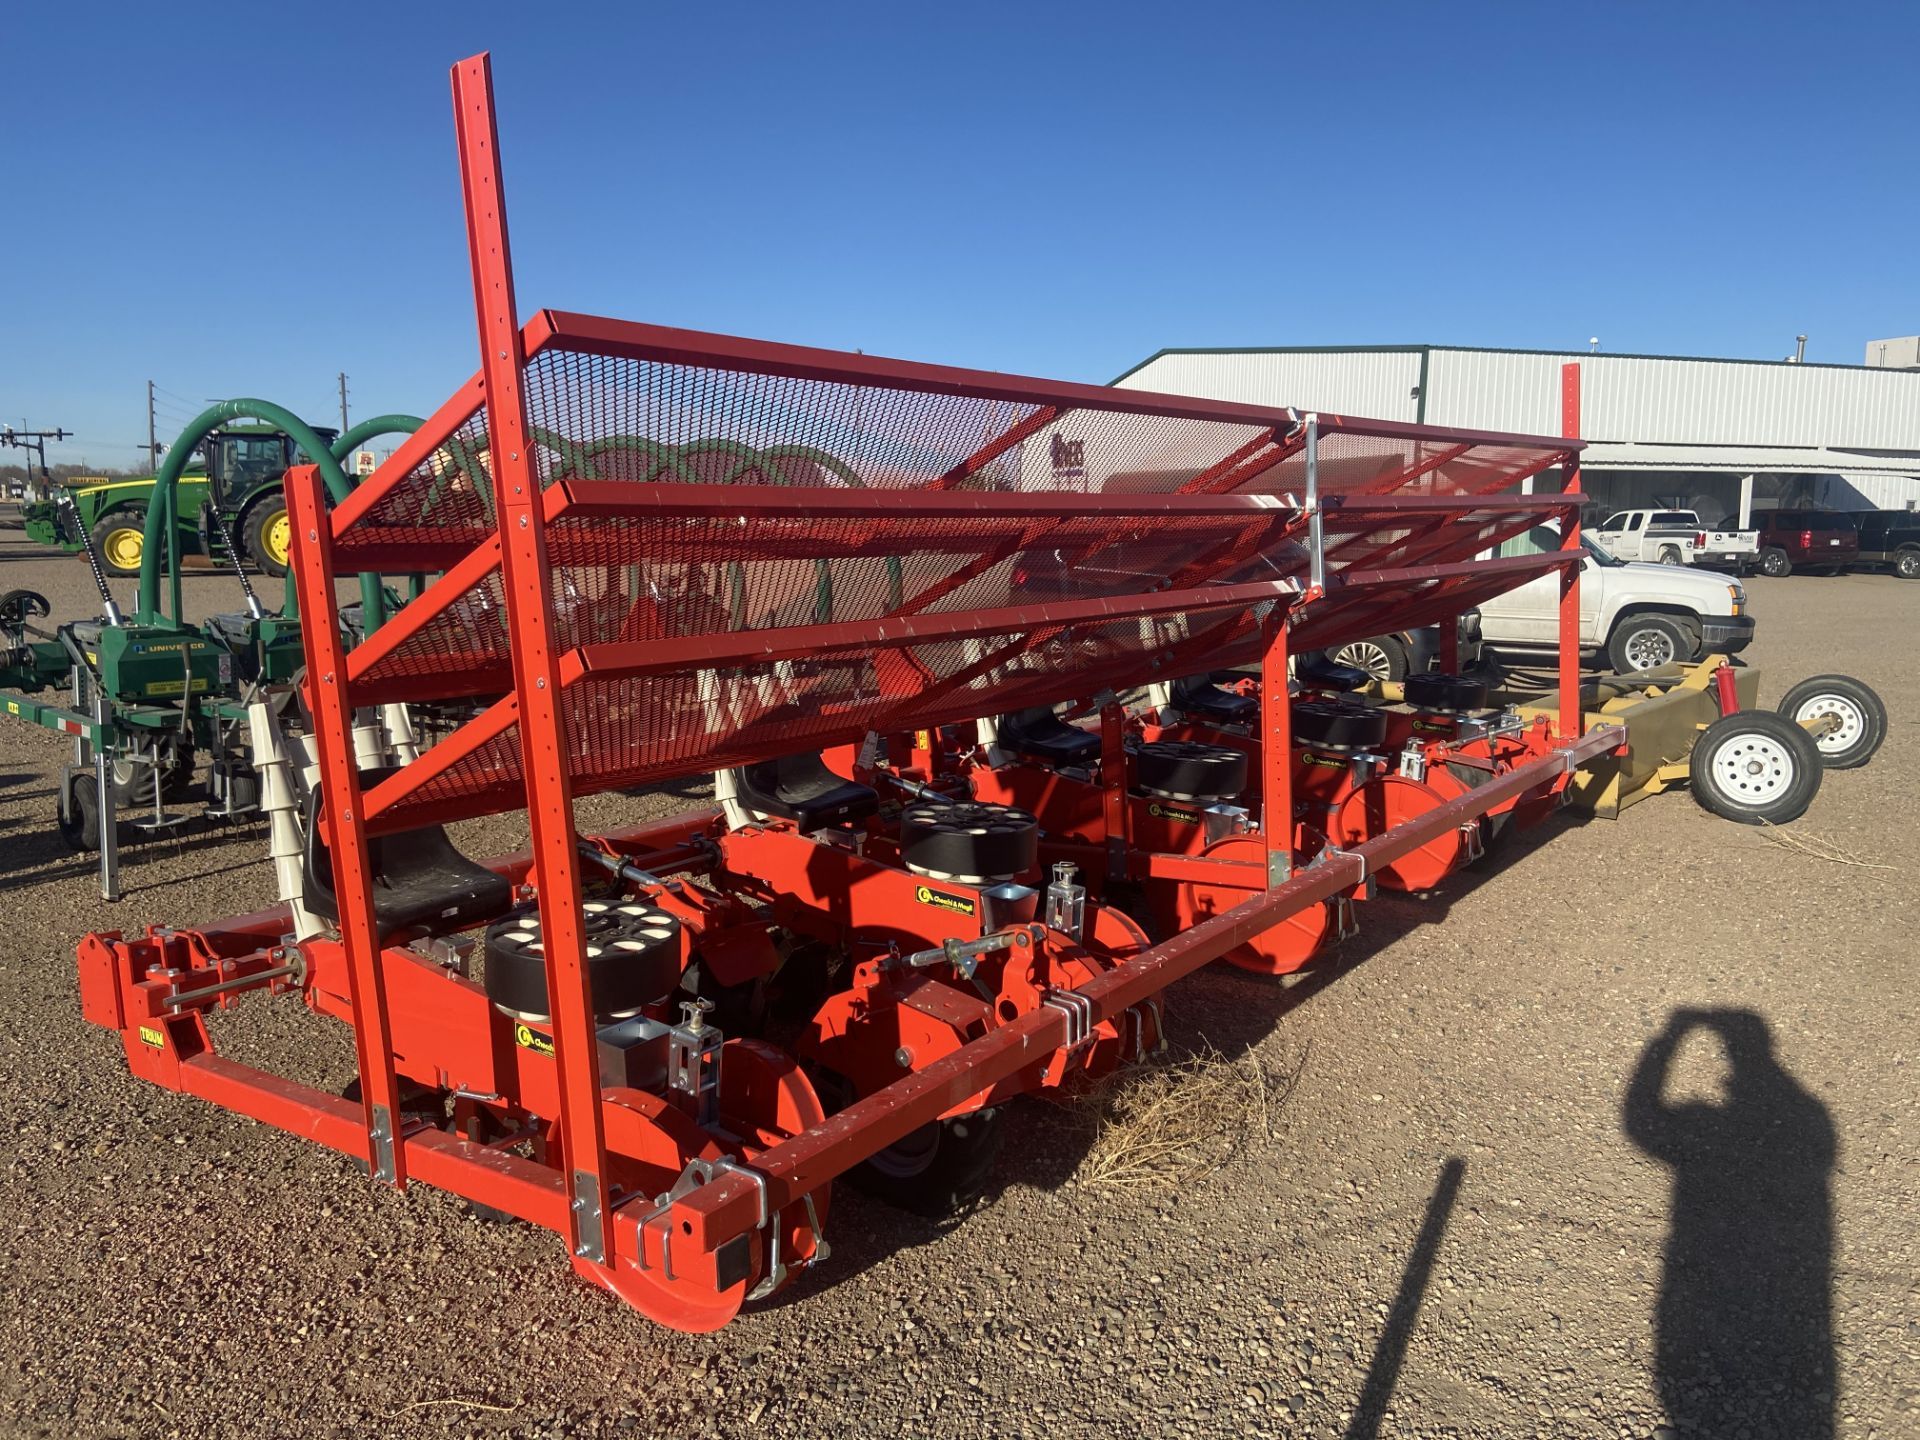 NEW Checchi and Magli 5 Seat Transplanter, Type# Trium 45, Year 2019, Rigging/ Loading Fee: TBD, - Image 2 of 5